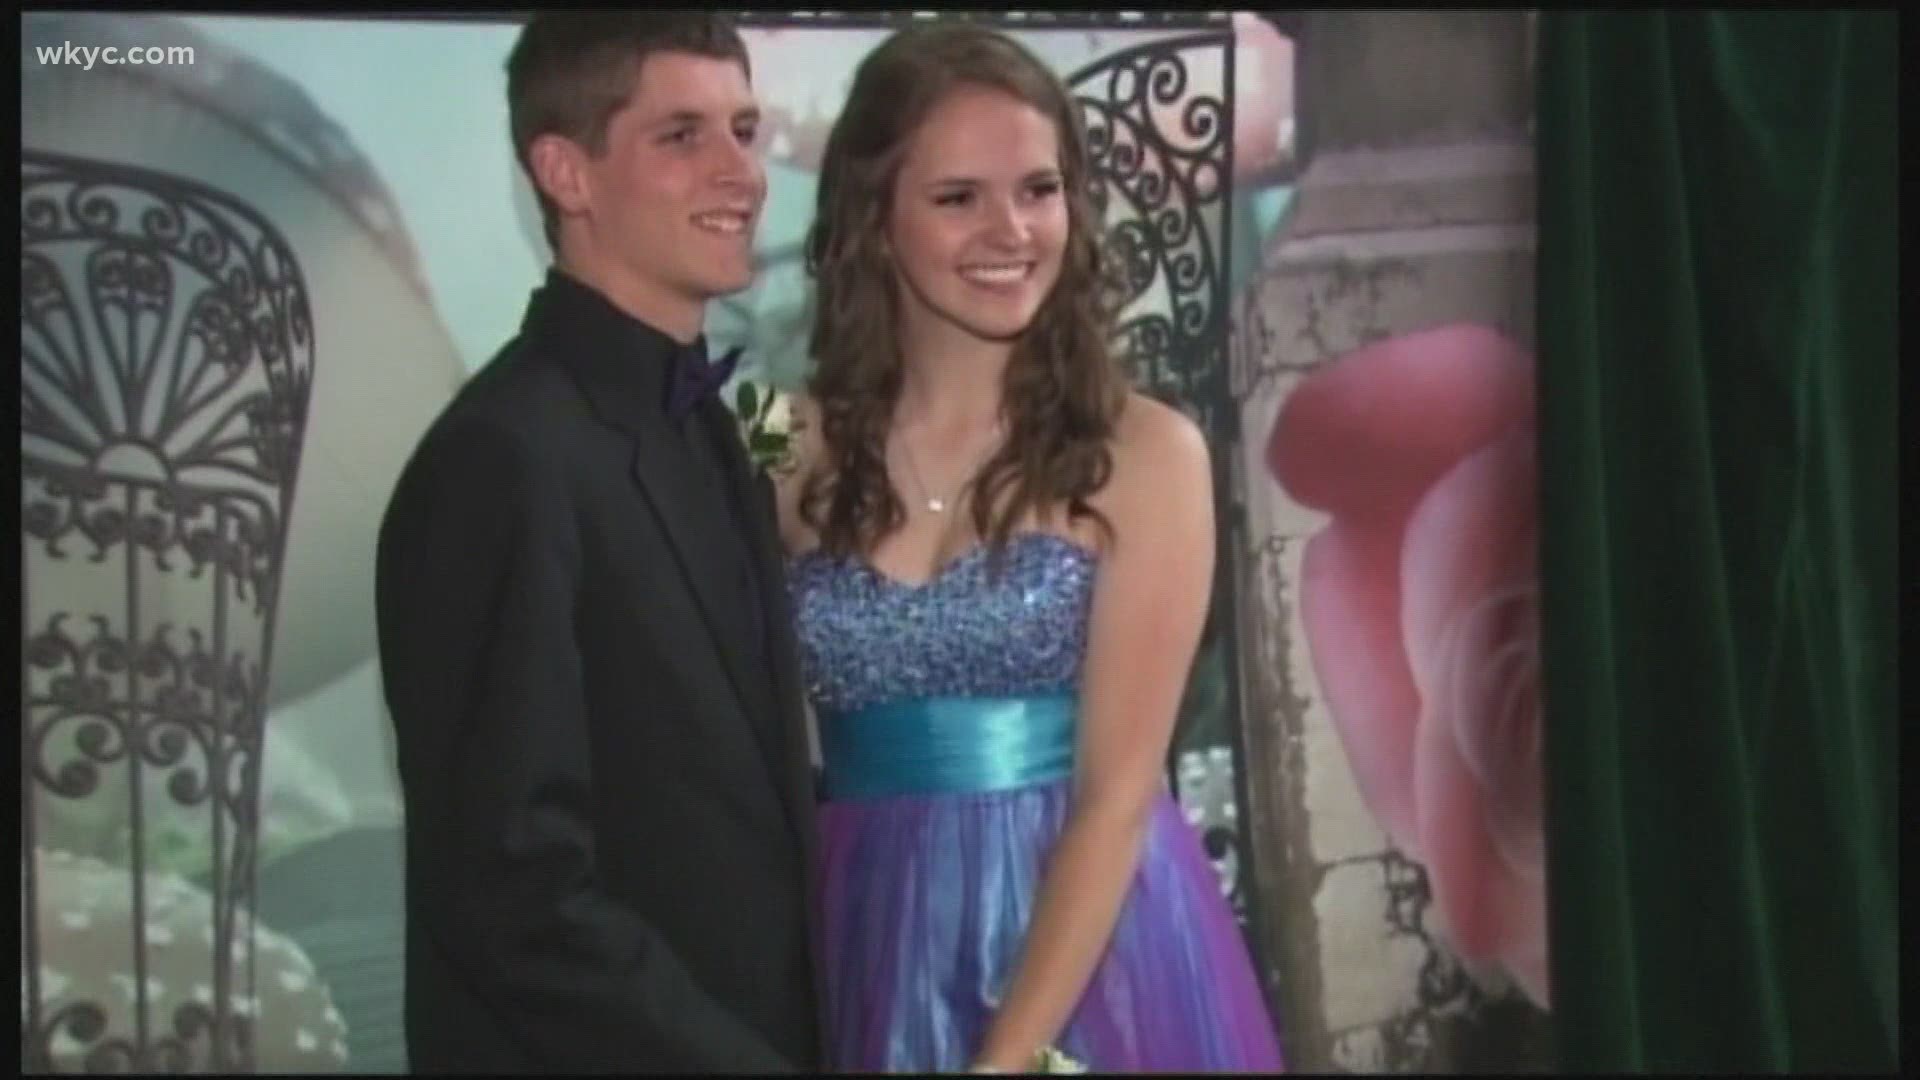 Last year, a lot of high school students lost out on a big night – their prom. But this year promises to be different.